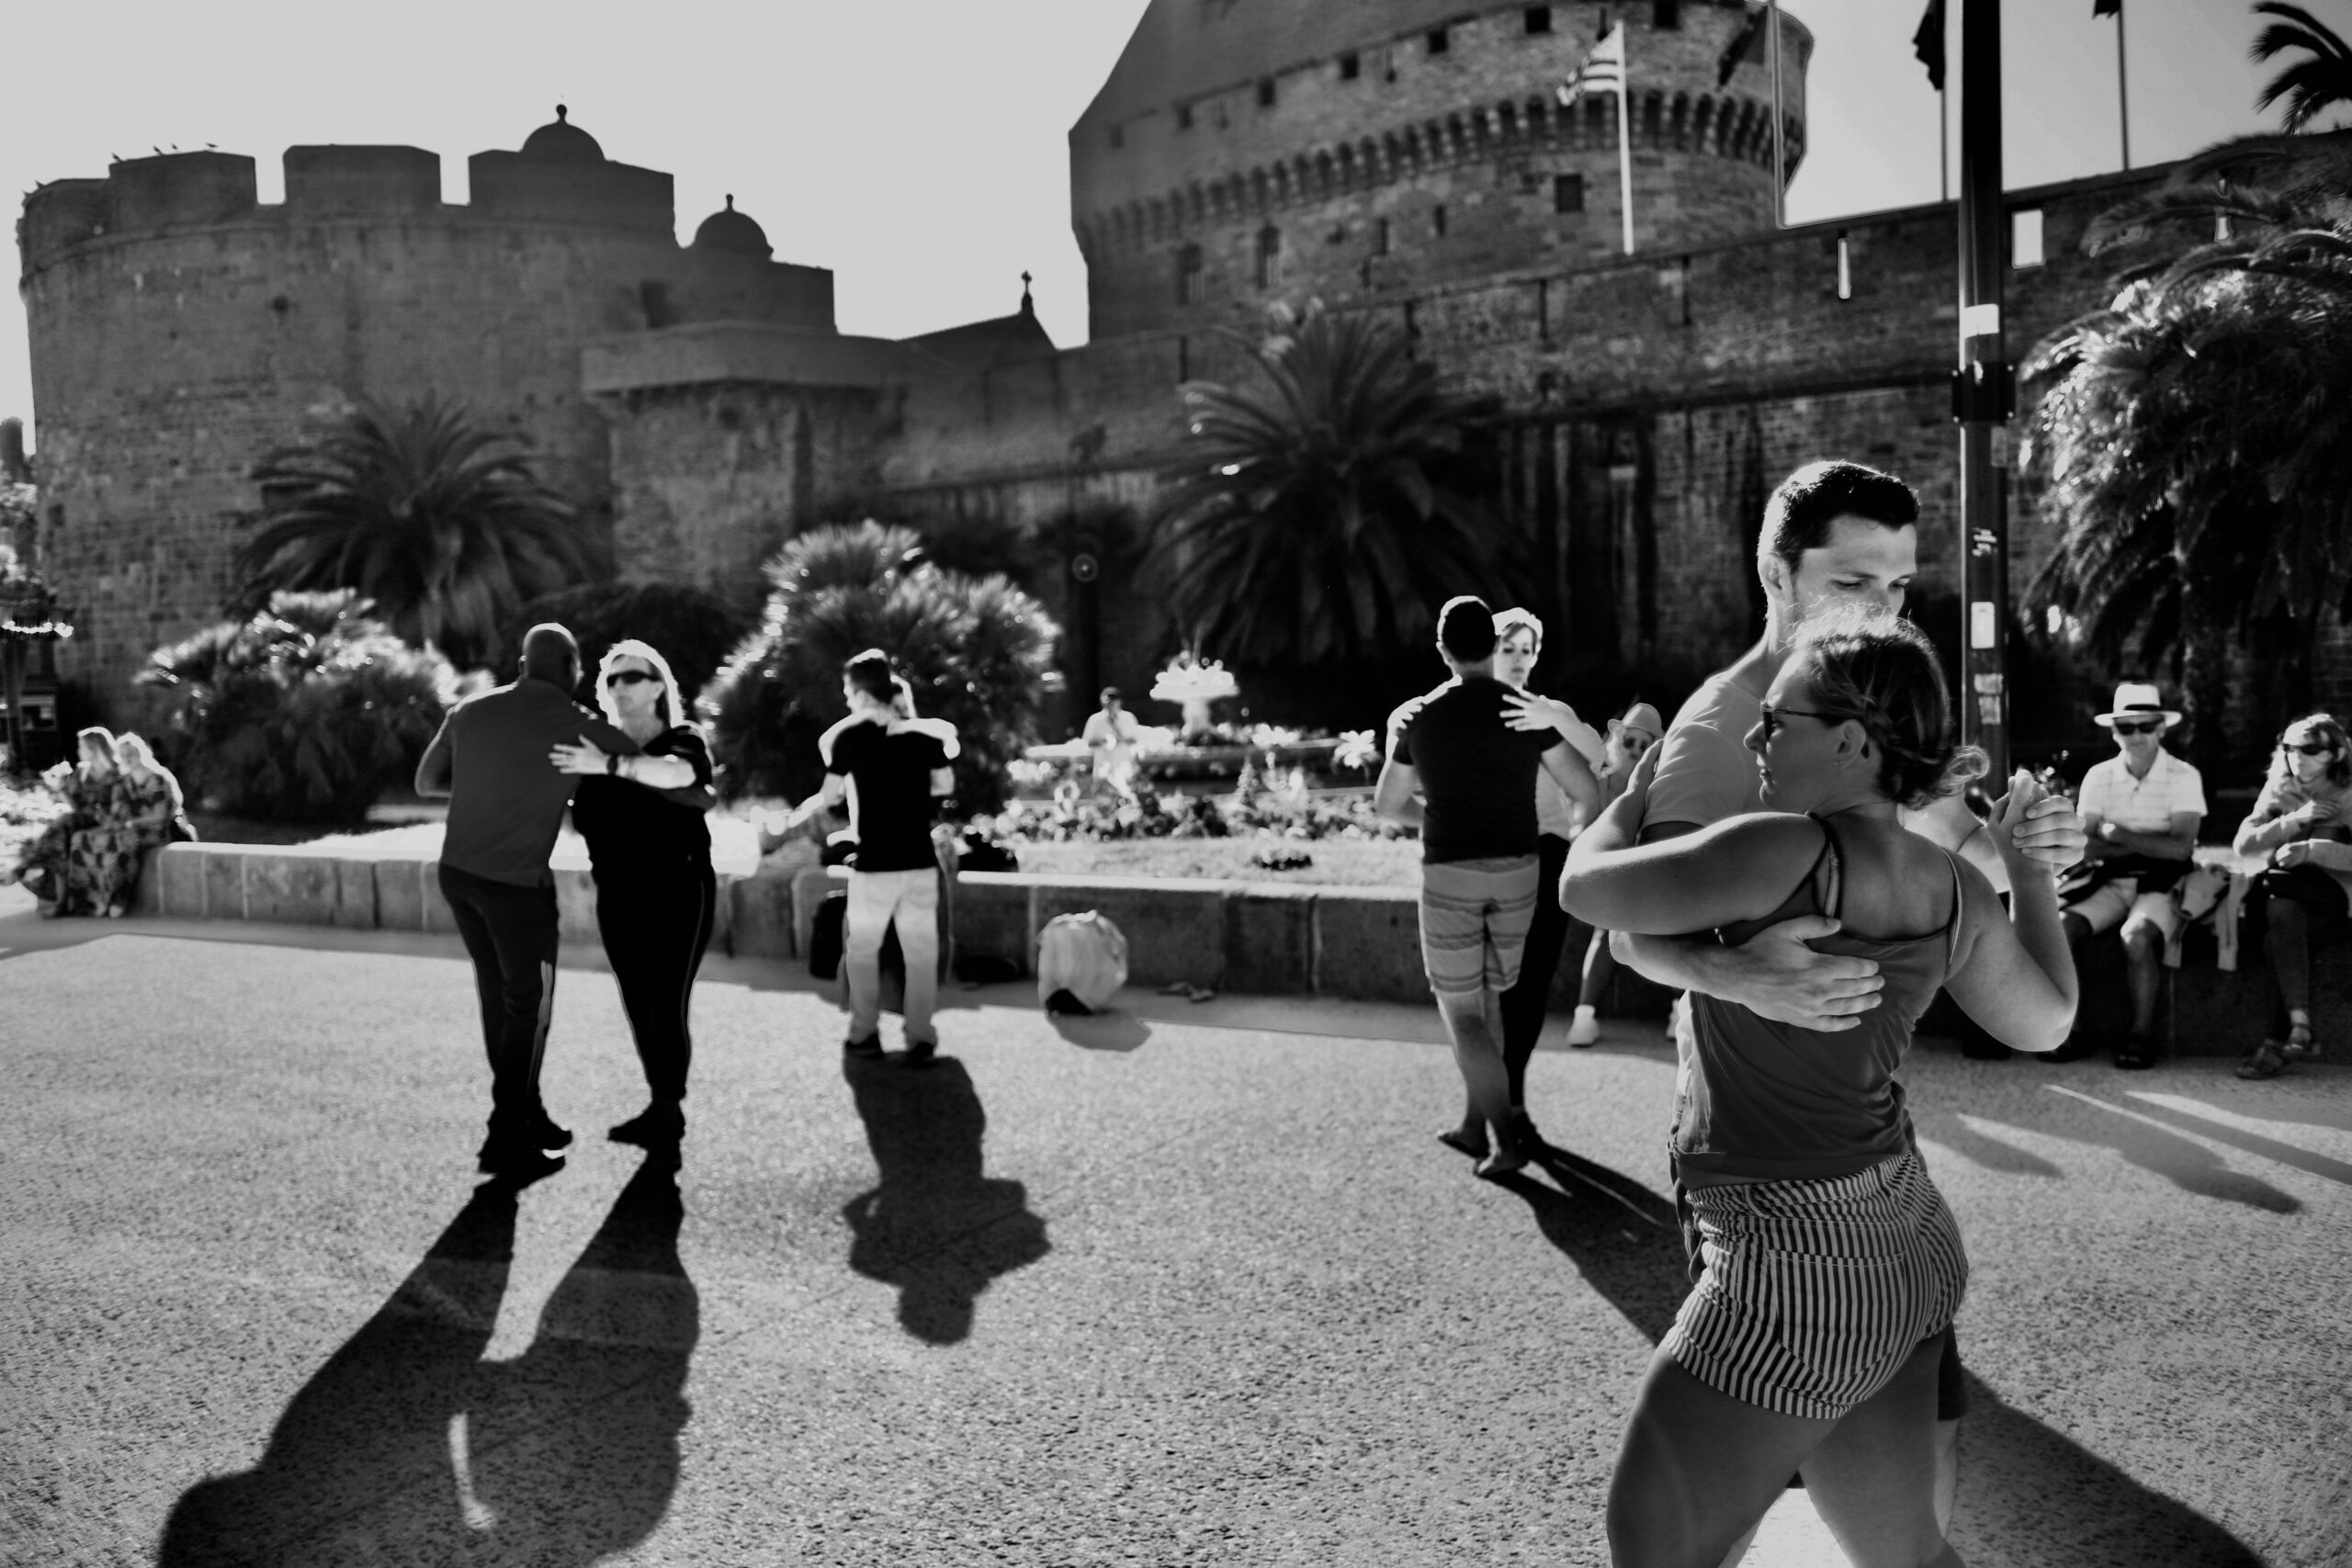 Dancing in the Sunlight: A Moment Captured in Saint-Malo